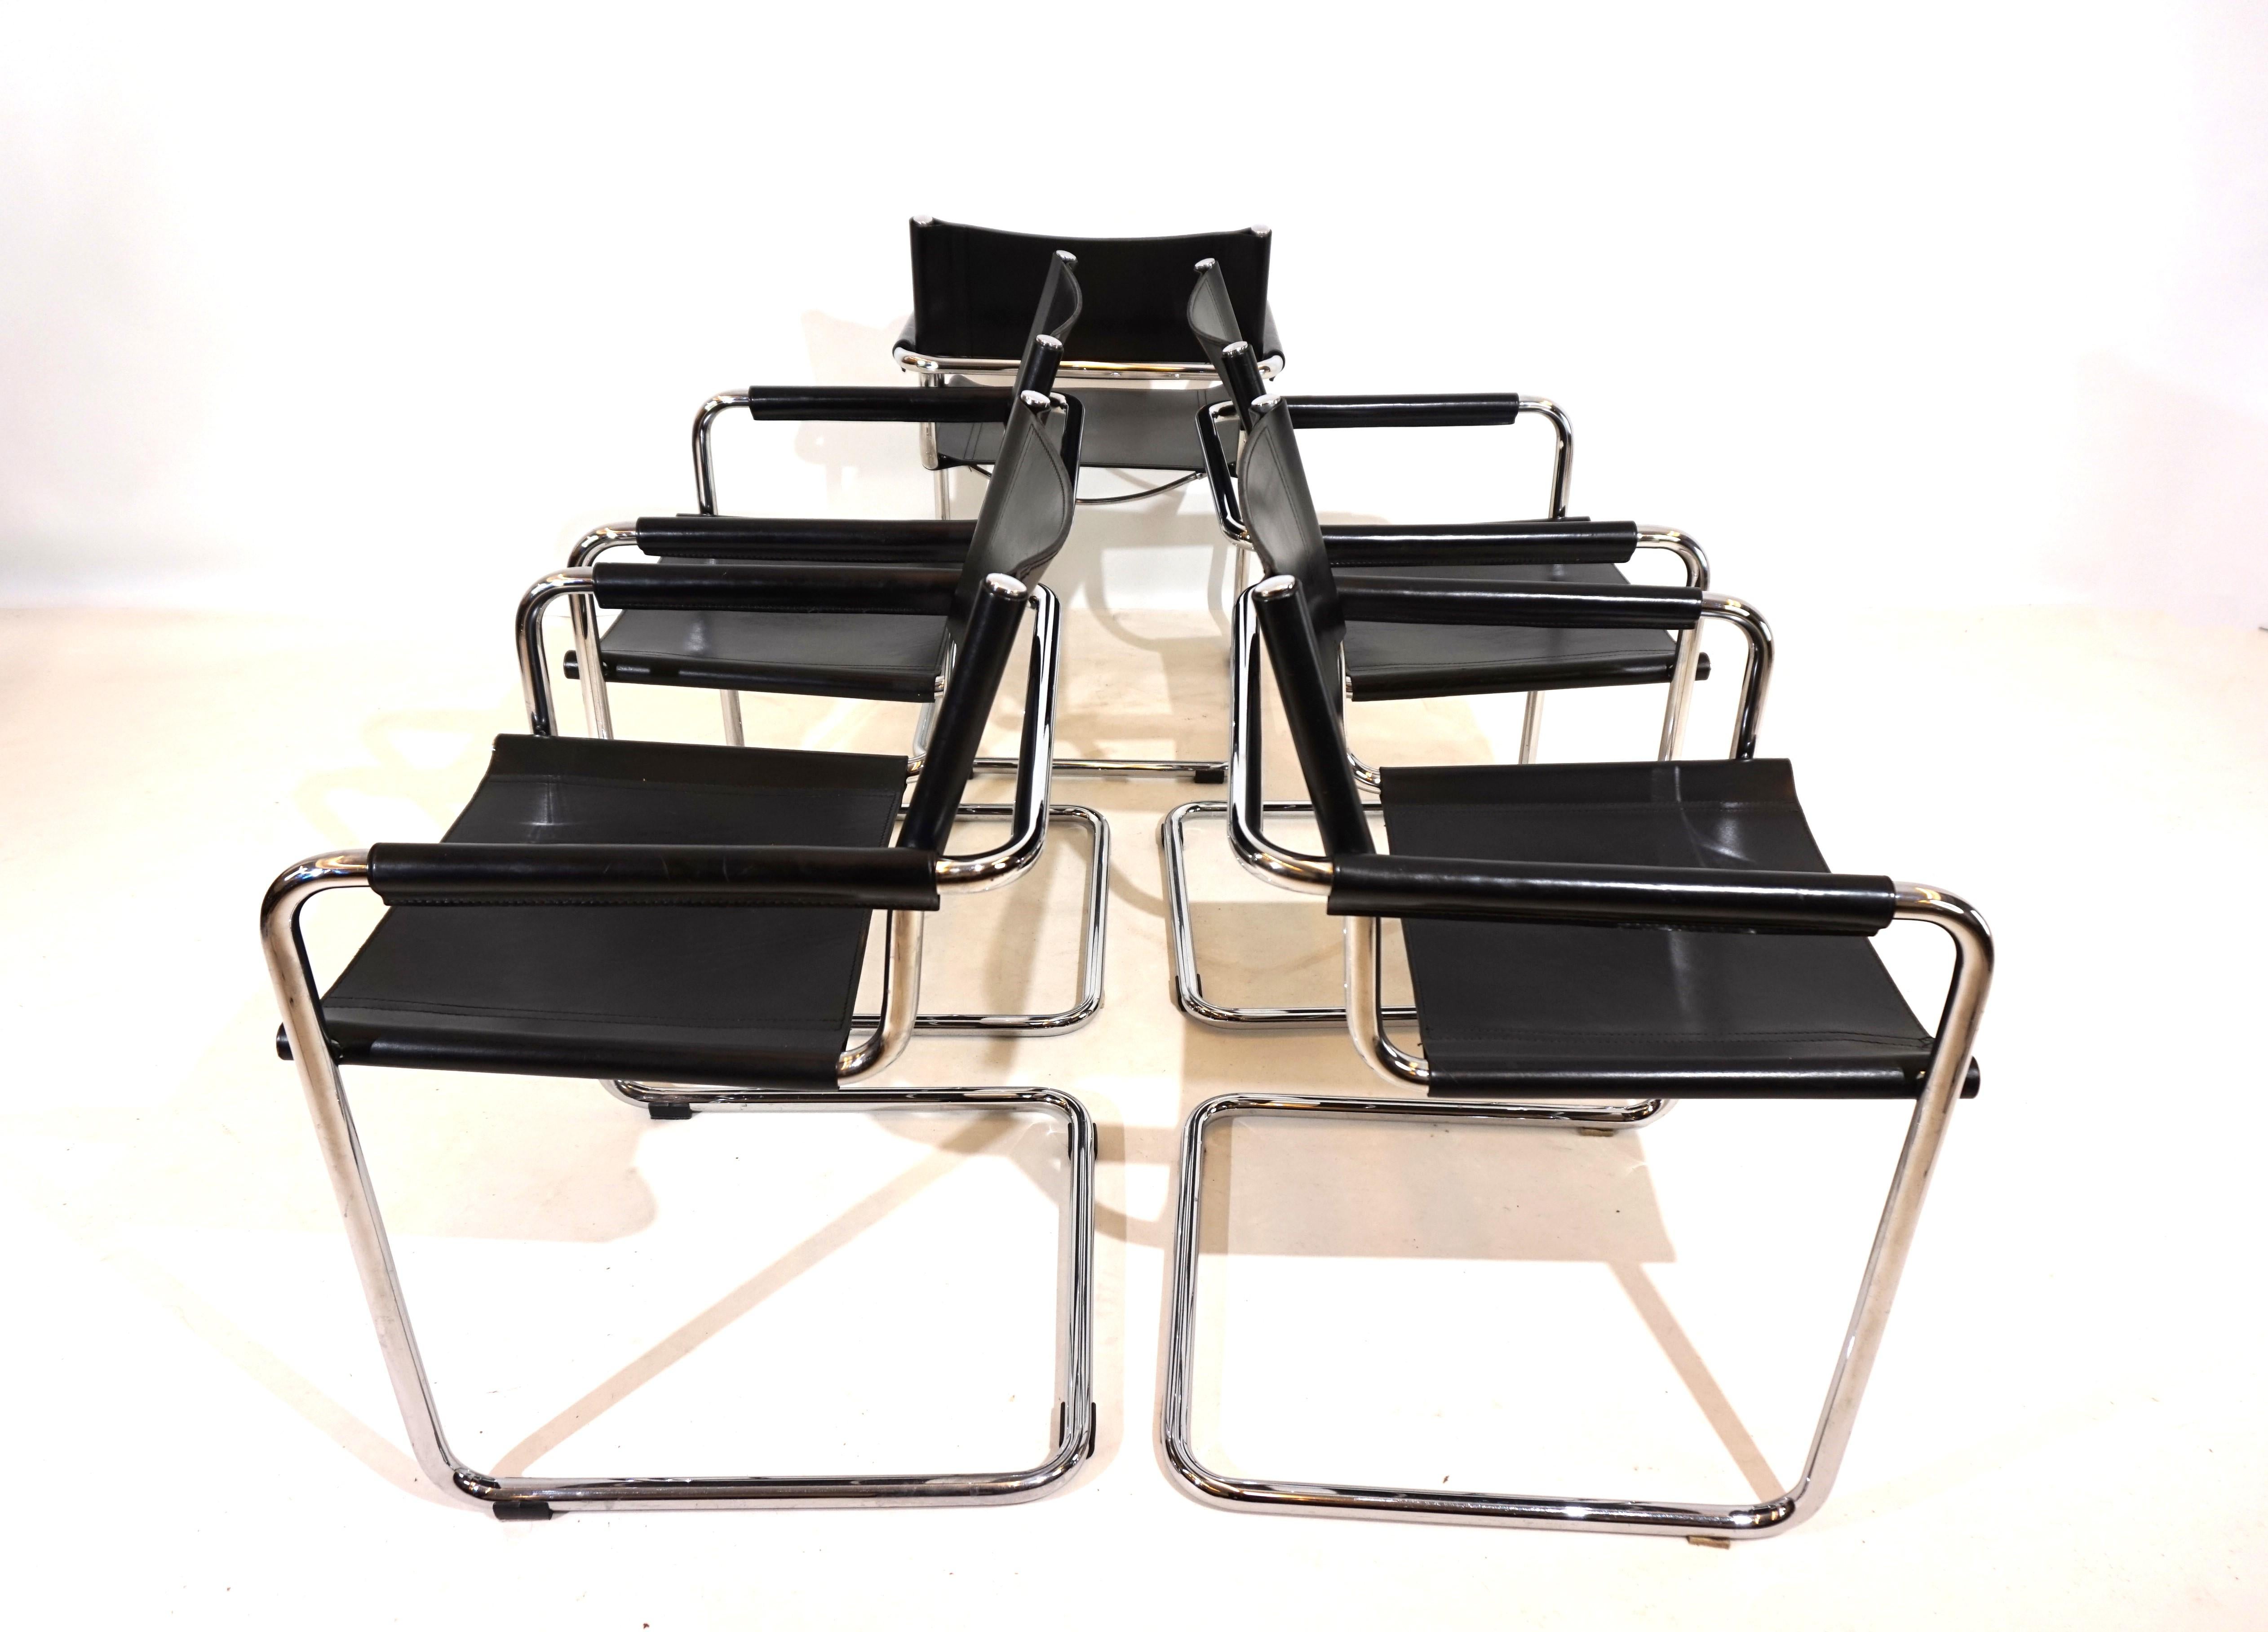 This classic cantilever set of 5 MG5 chairs in black saddle leather is in excellent condition. The thick leather shows minimal signs of wear, the chrome frames are in very good condition. The armrests are designed in the more exclusive